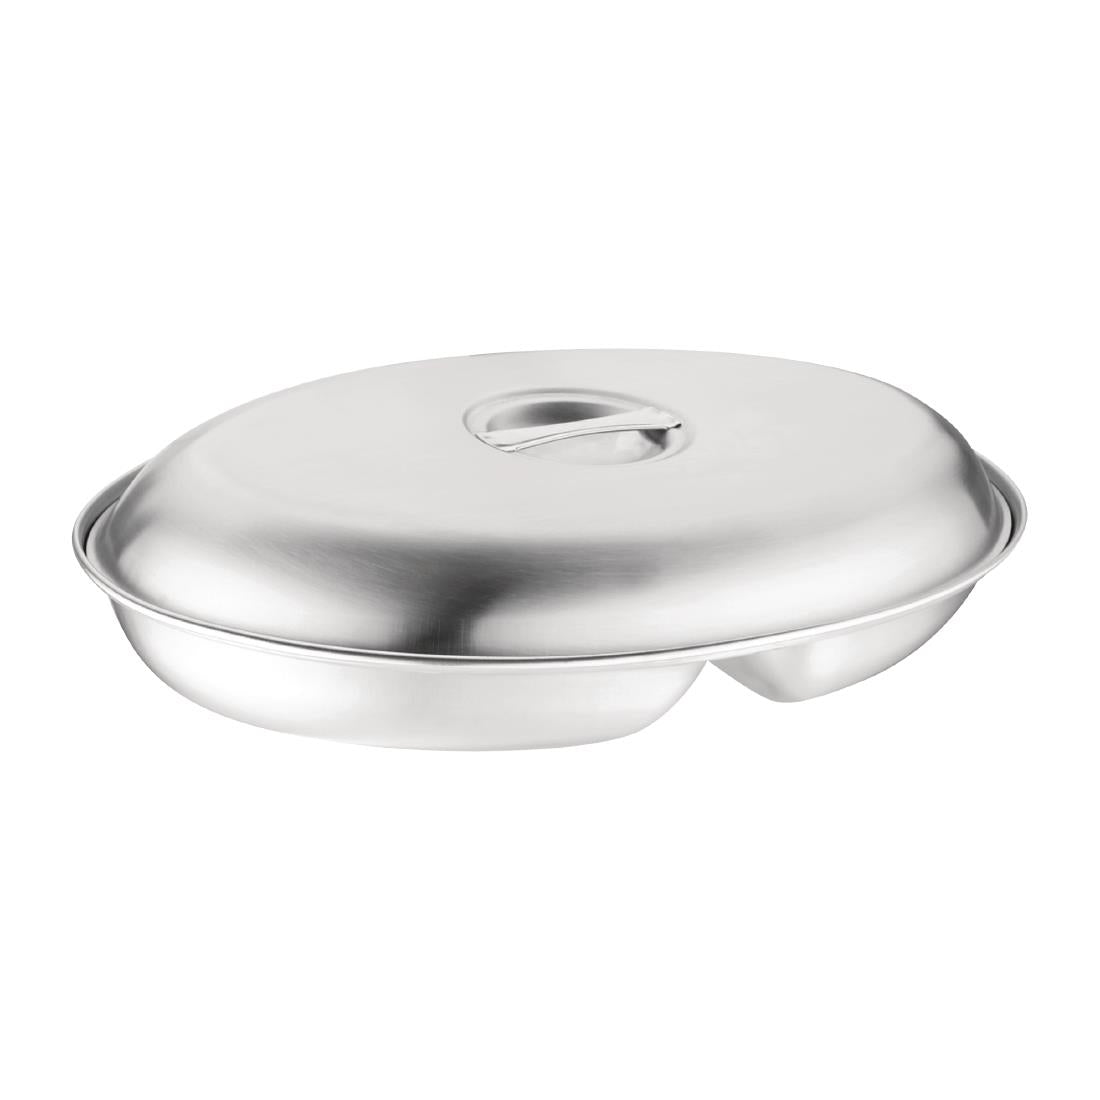 P182 Olympia Oval Vegetable Dish Lid 250 x 170mm